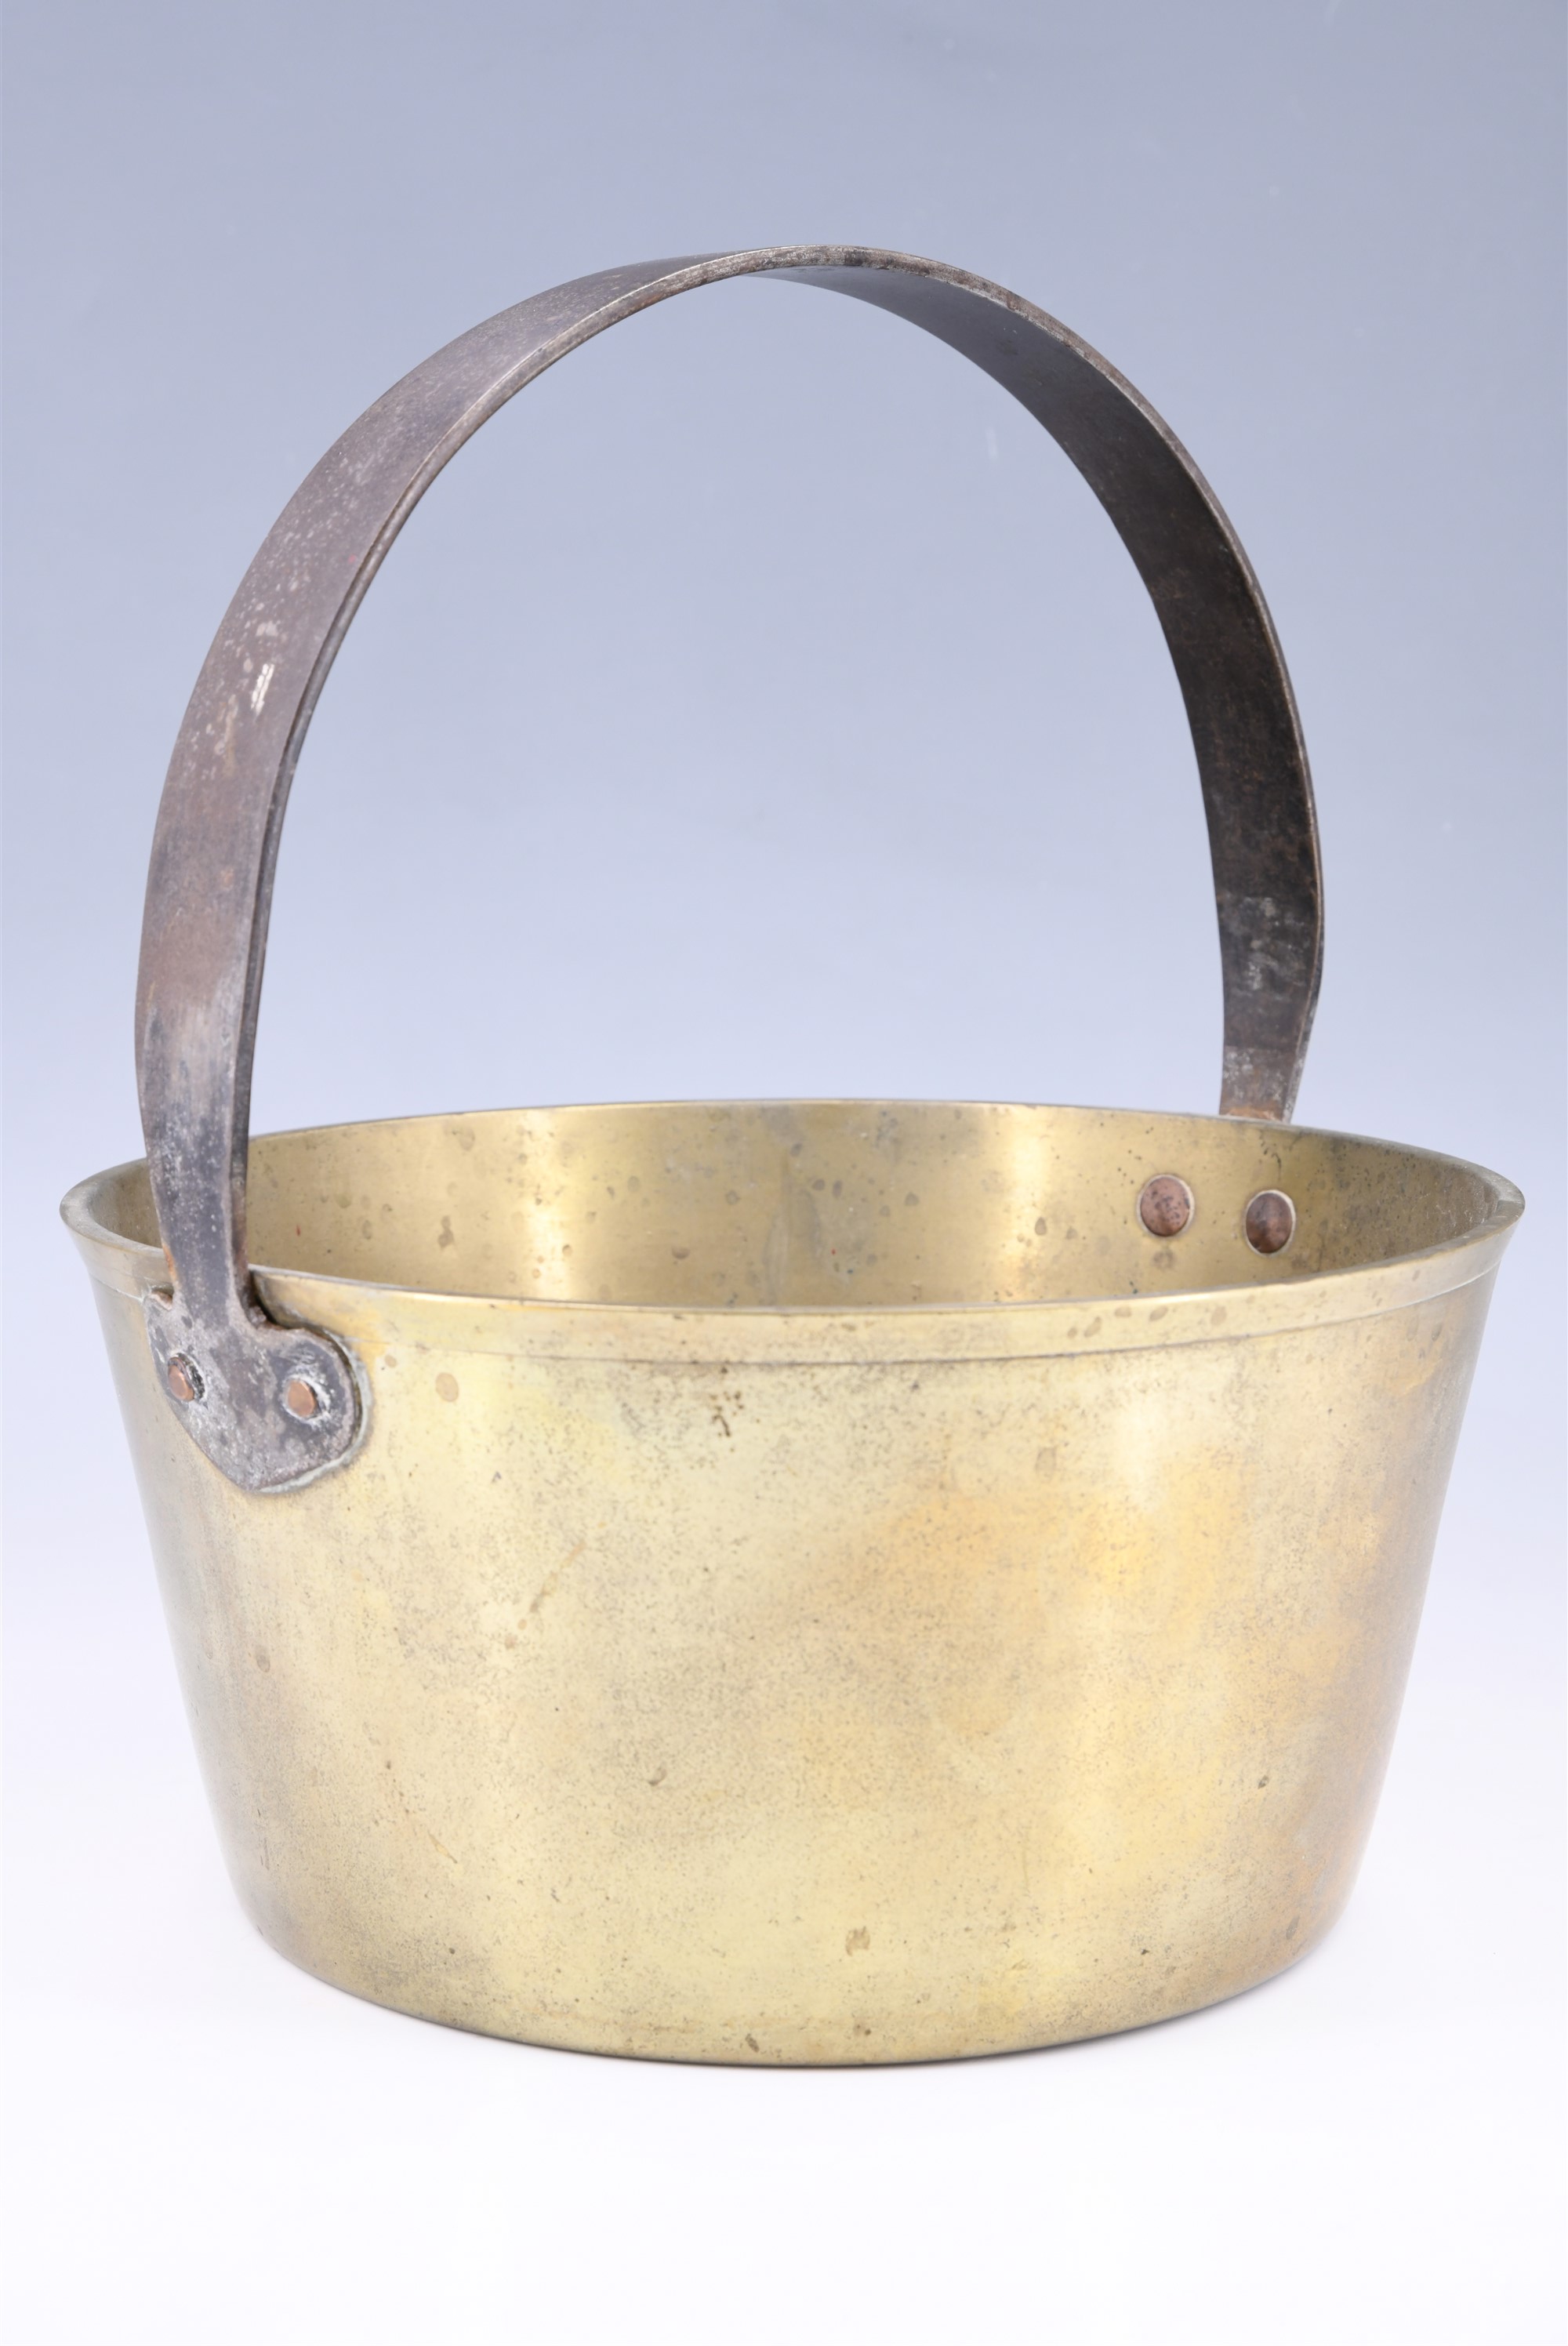 A Victorian cast brass and wrought iron jam pan, 27.5 cm diameter - Image 2 of 4